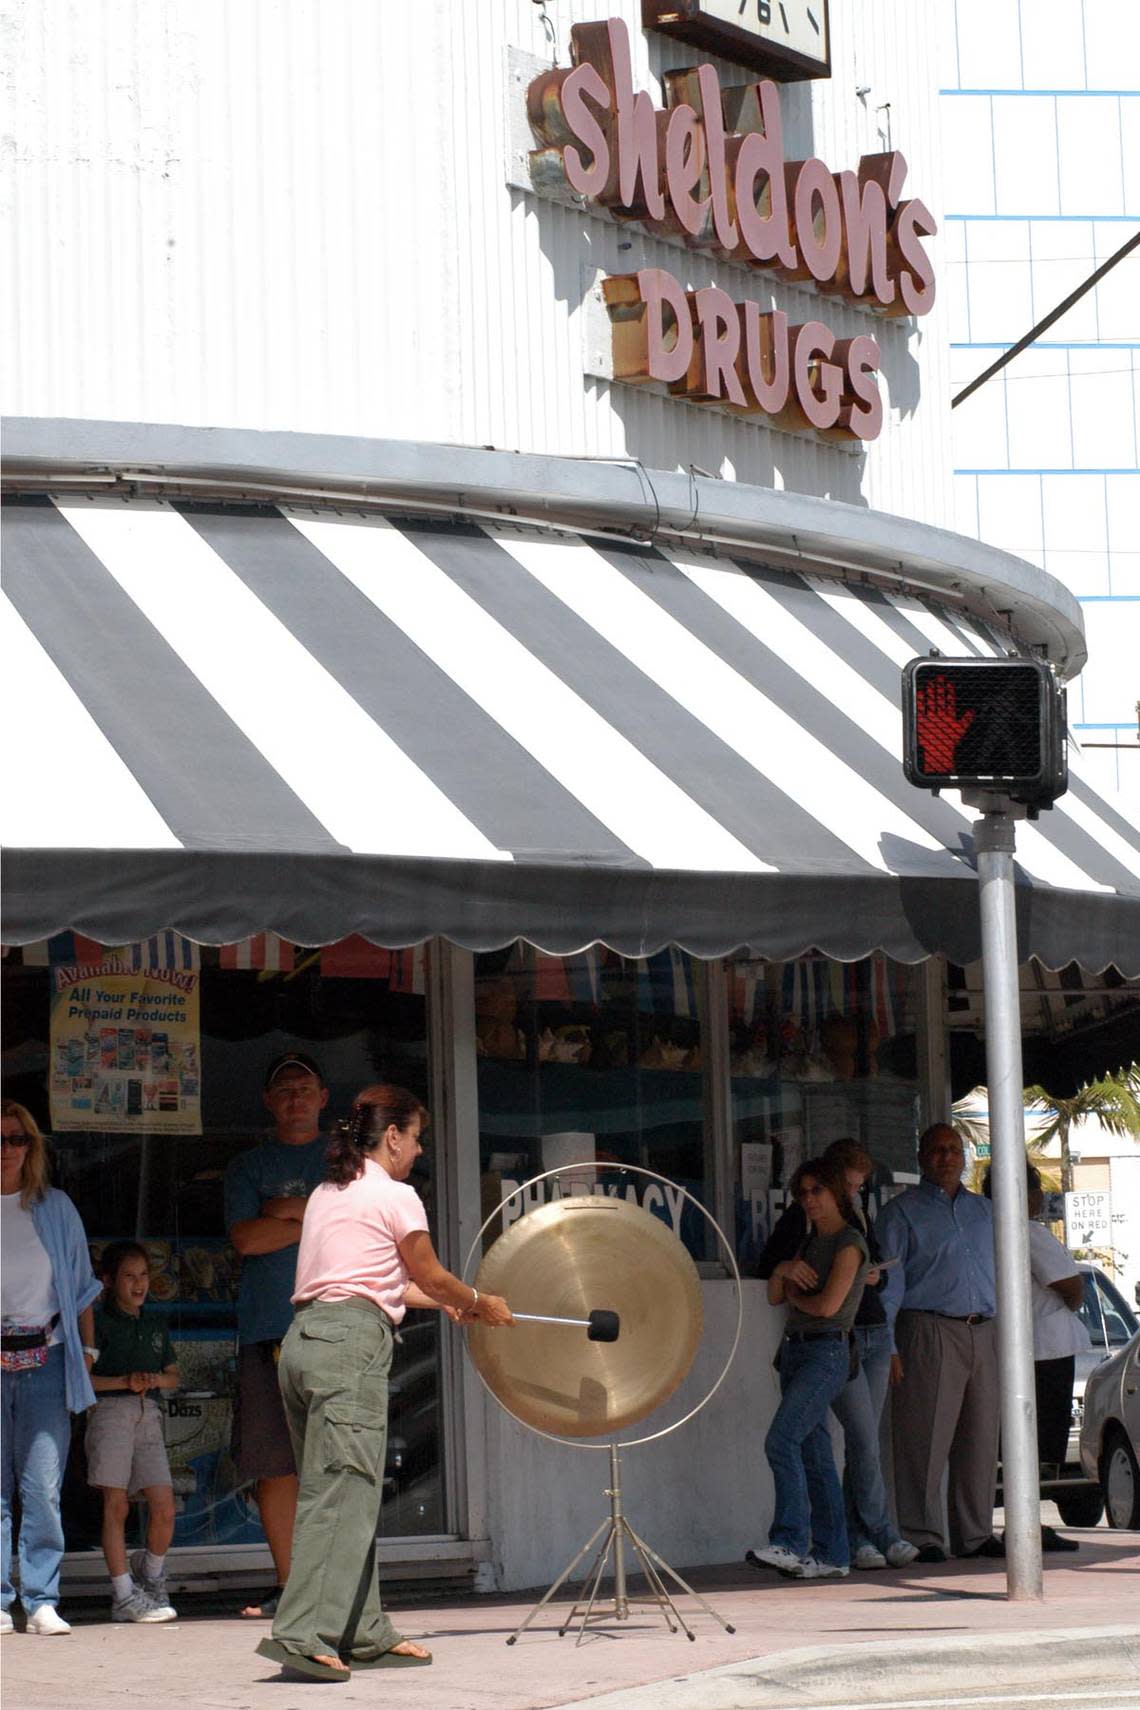 Sheldon’s Drugs in Surtfside closed in 2004 after 55 years in business.